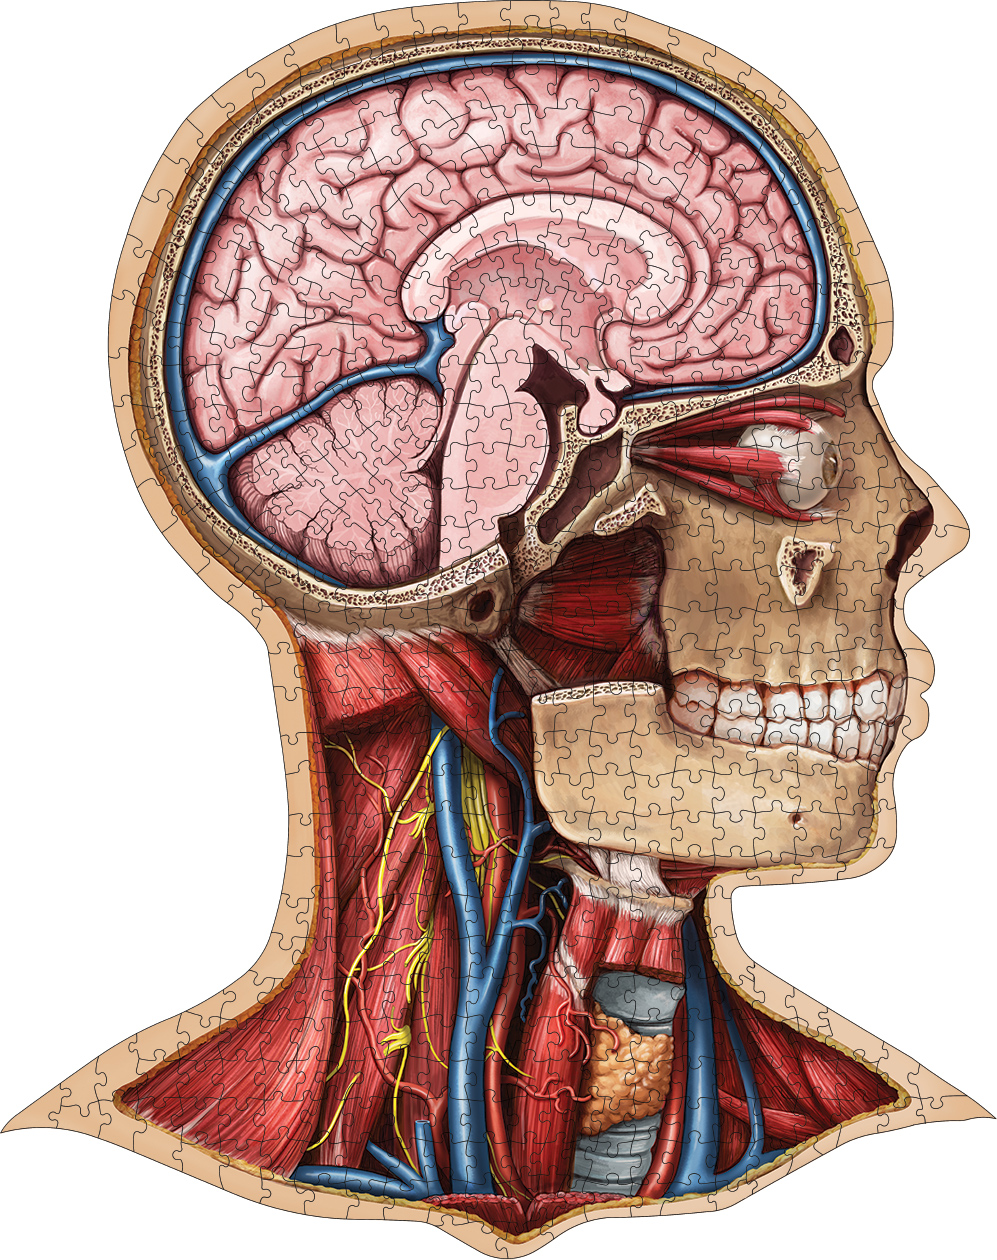 Dr. Livingston's Anatomy Jigsaw Puzzle: The Human Head Science Shaped Puzzle